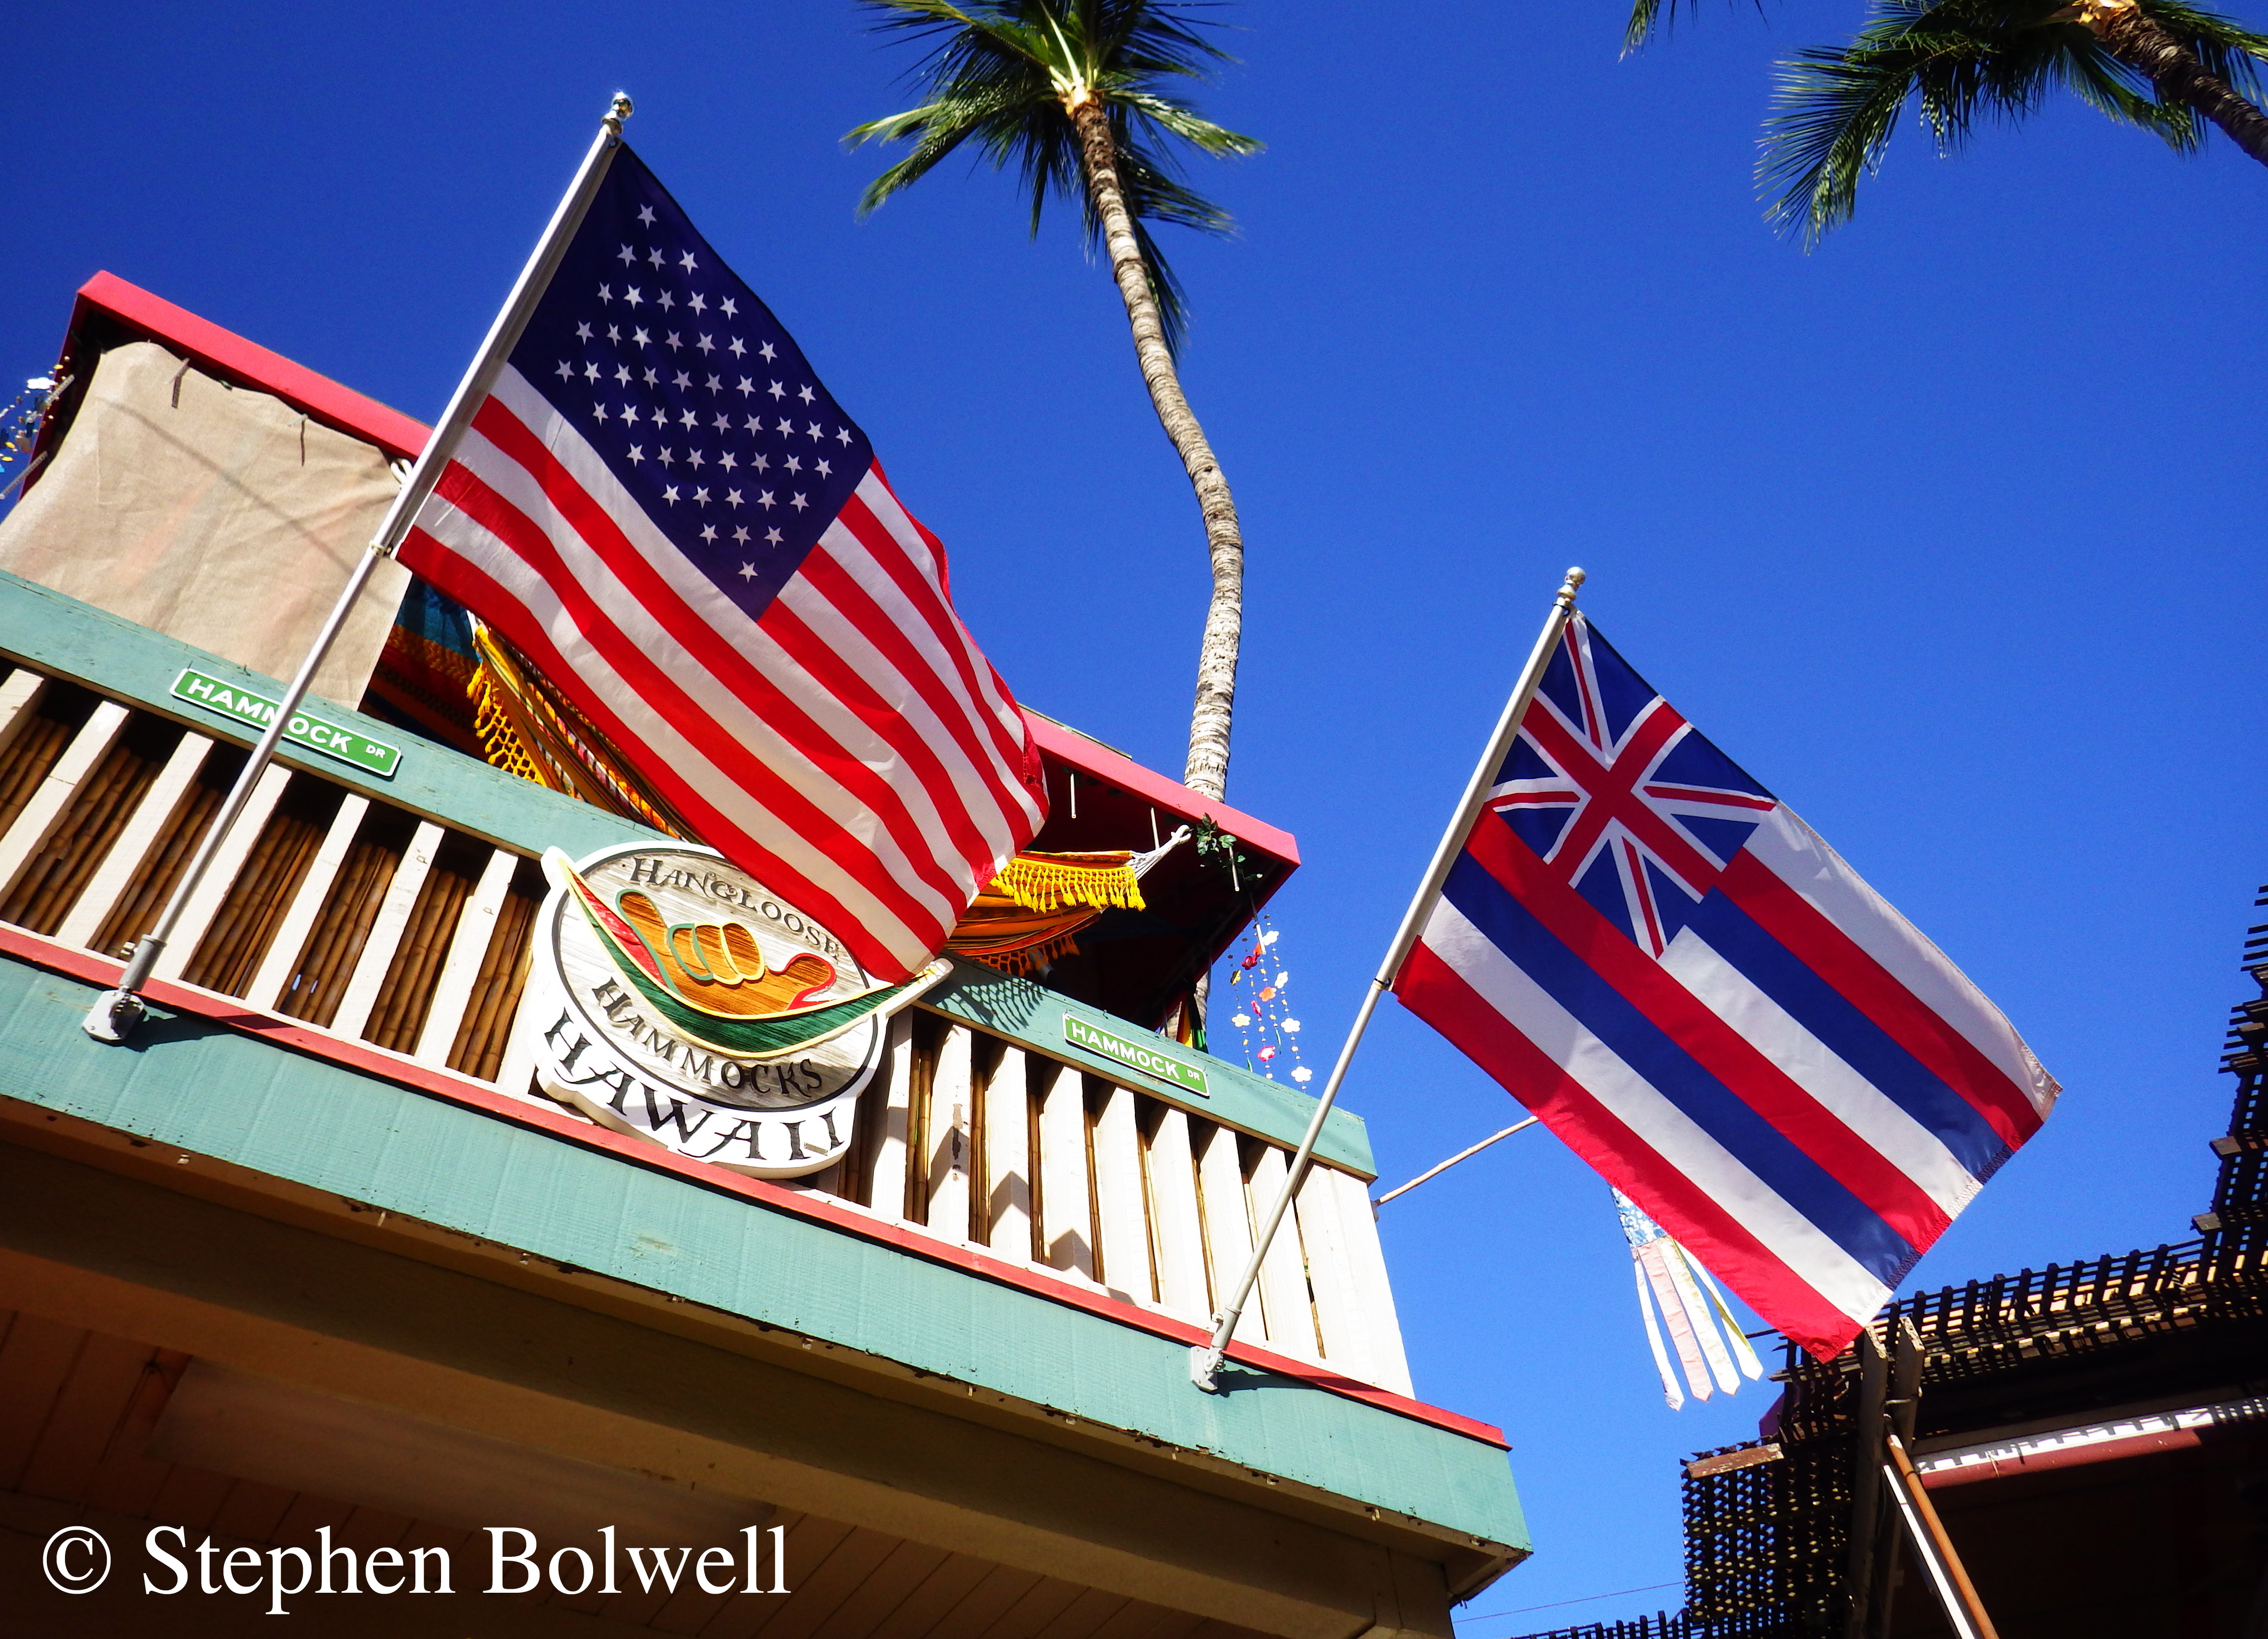 Flags are not traditionally Polynesian; these two flutter beneath an Hawaiian sky as a reminder of the transient nature of colonialism.